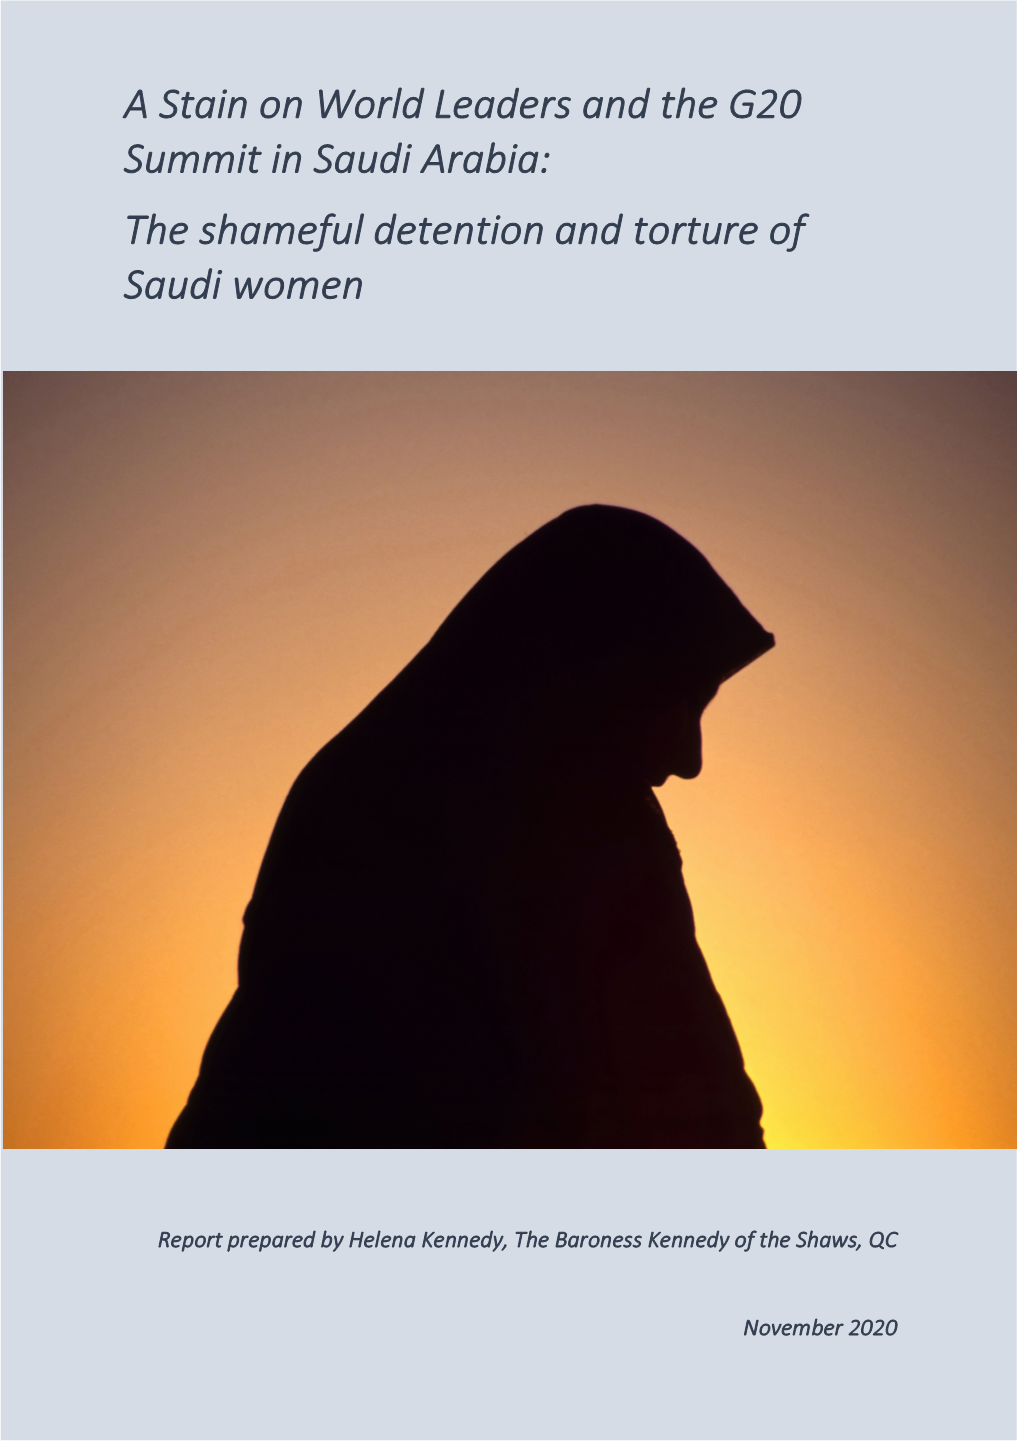 A Stain on World Leaders and the G20 Summit in Saudi Arabia: the Shameful Detention and Torture of Saudi Women